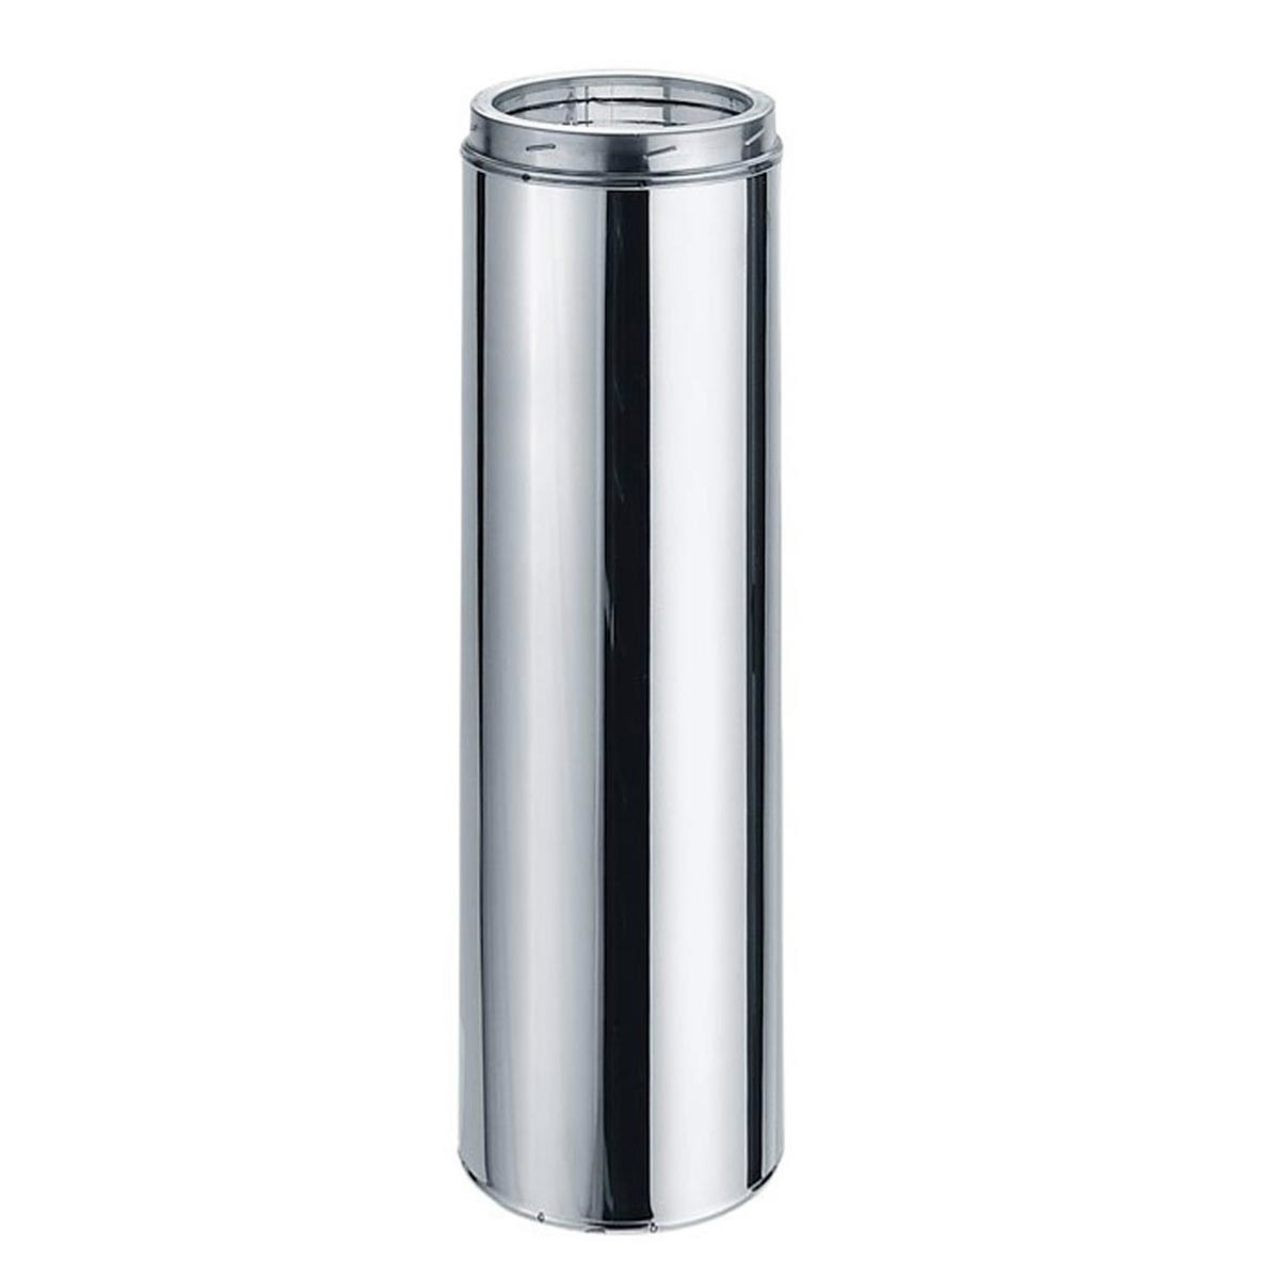 6 x 36 DuraTech Stainless Steel Chimney Pipe - 6DT-36SS